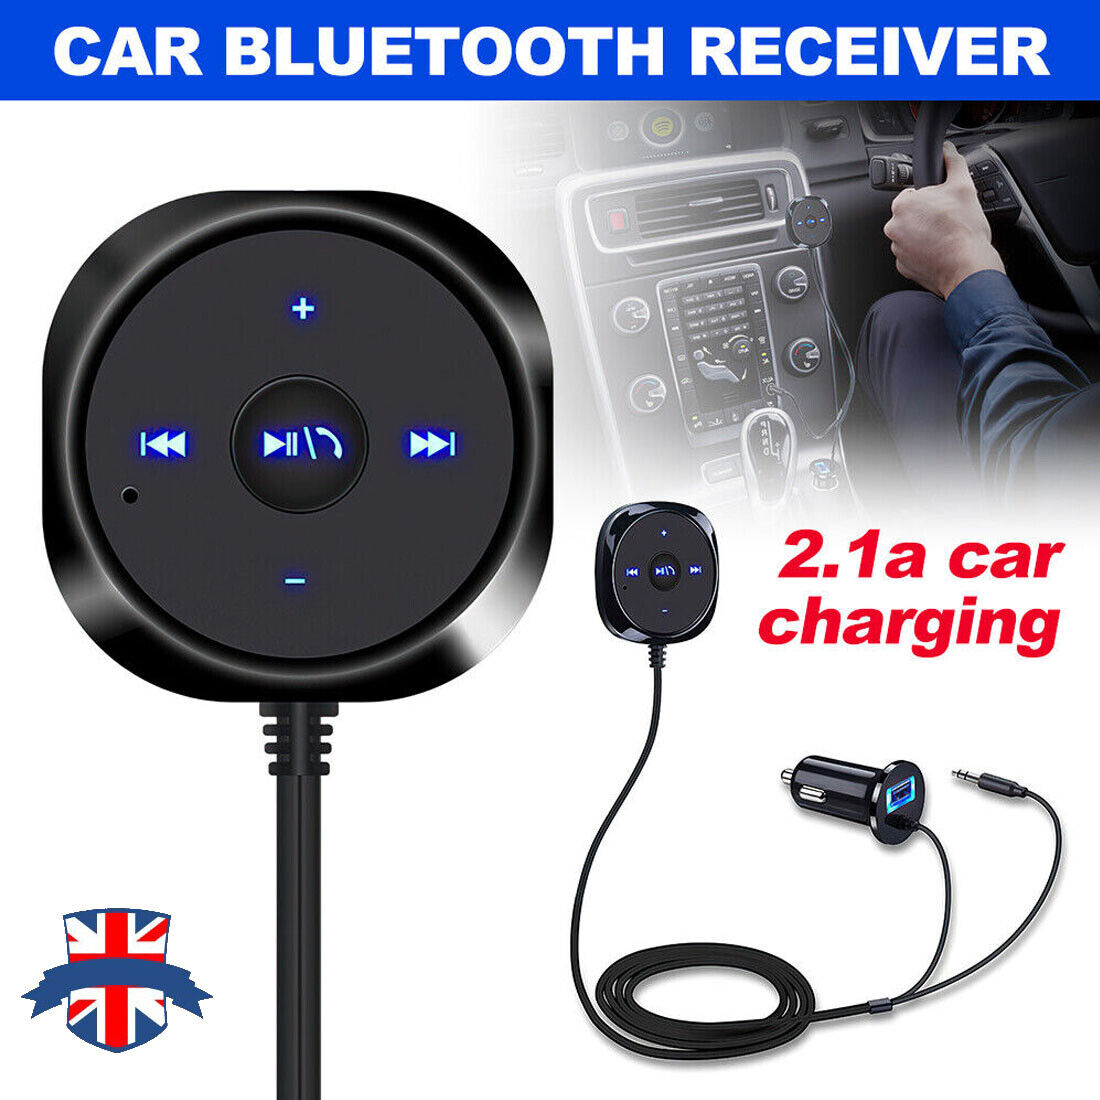 🚗AUX-in Bluetooth Wireless Receiver Adapter Dongle For Car Stereo Audio Speaker - Vortex Trends